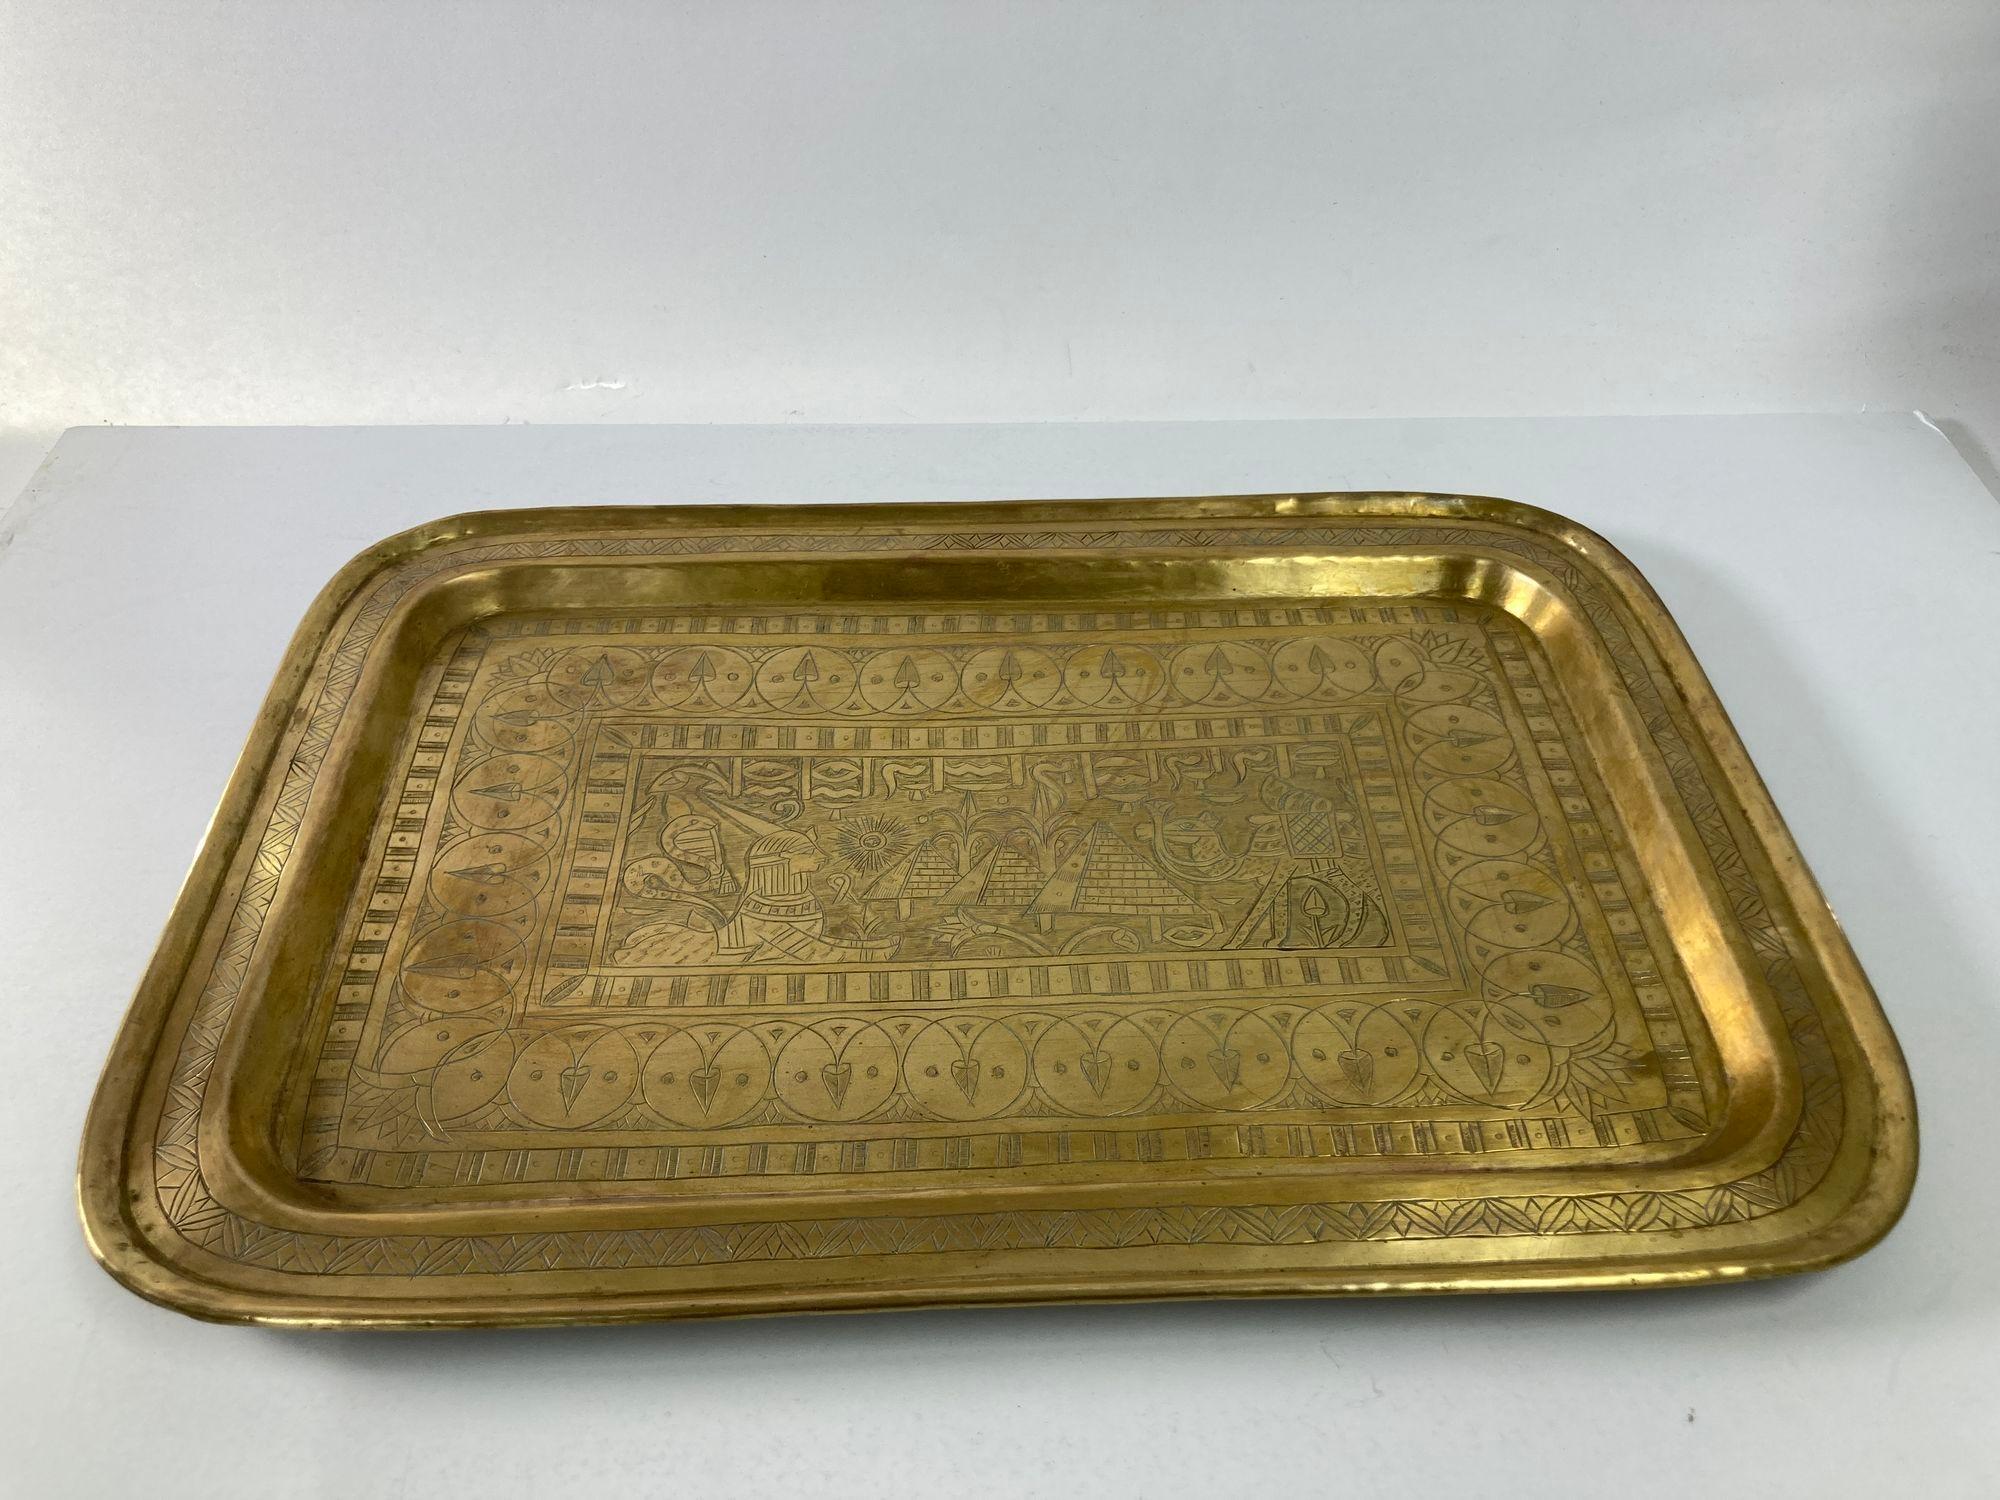 Antique 1920s Art Deco Egyptian-Revival rectangular brass tray.
This stylish hand-made brass tray platter dates from the early 1920s with its motif of Art Deco stylized Egyptian figures, sphynx, camel, pyramids, snakes and hieroglyphics.
Middle